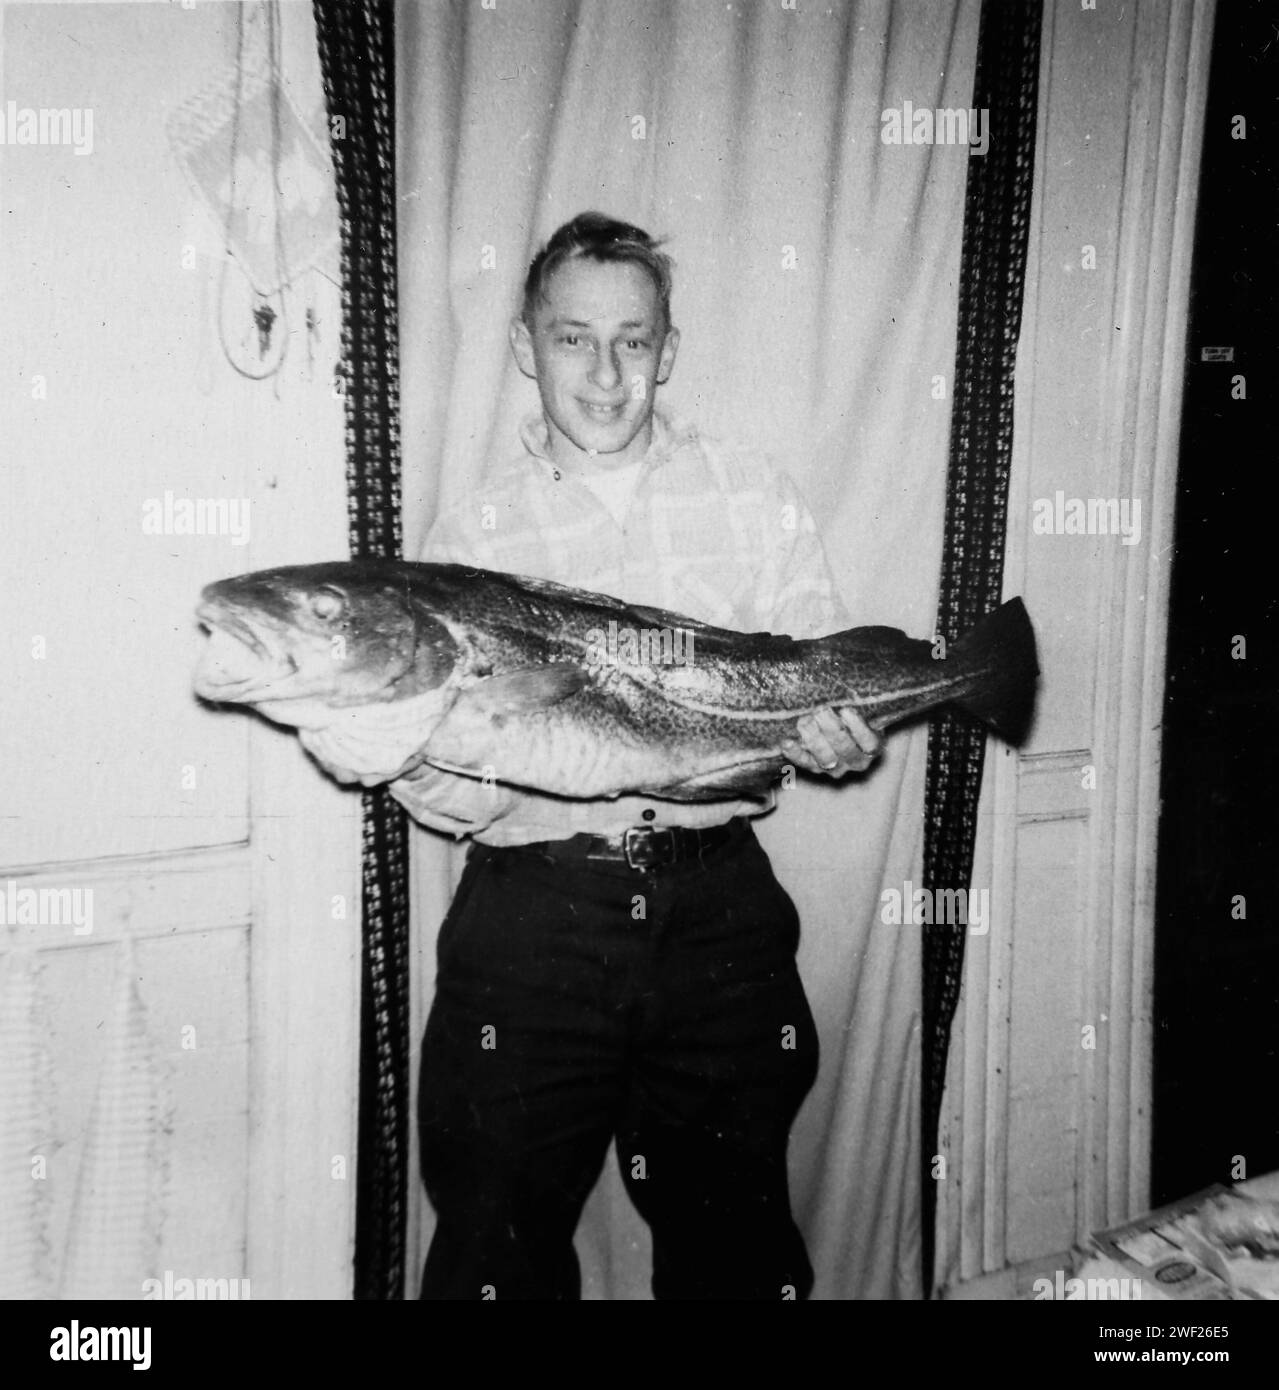 Old man and catch of fish Black and White Stock Photos & Images - Alamy